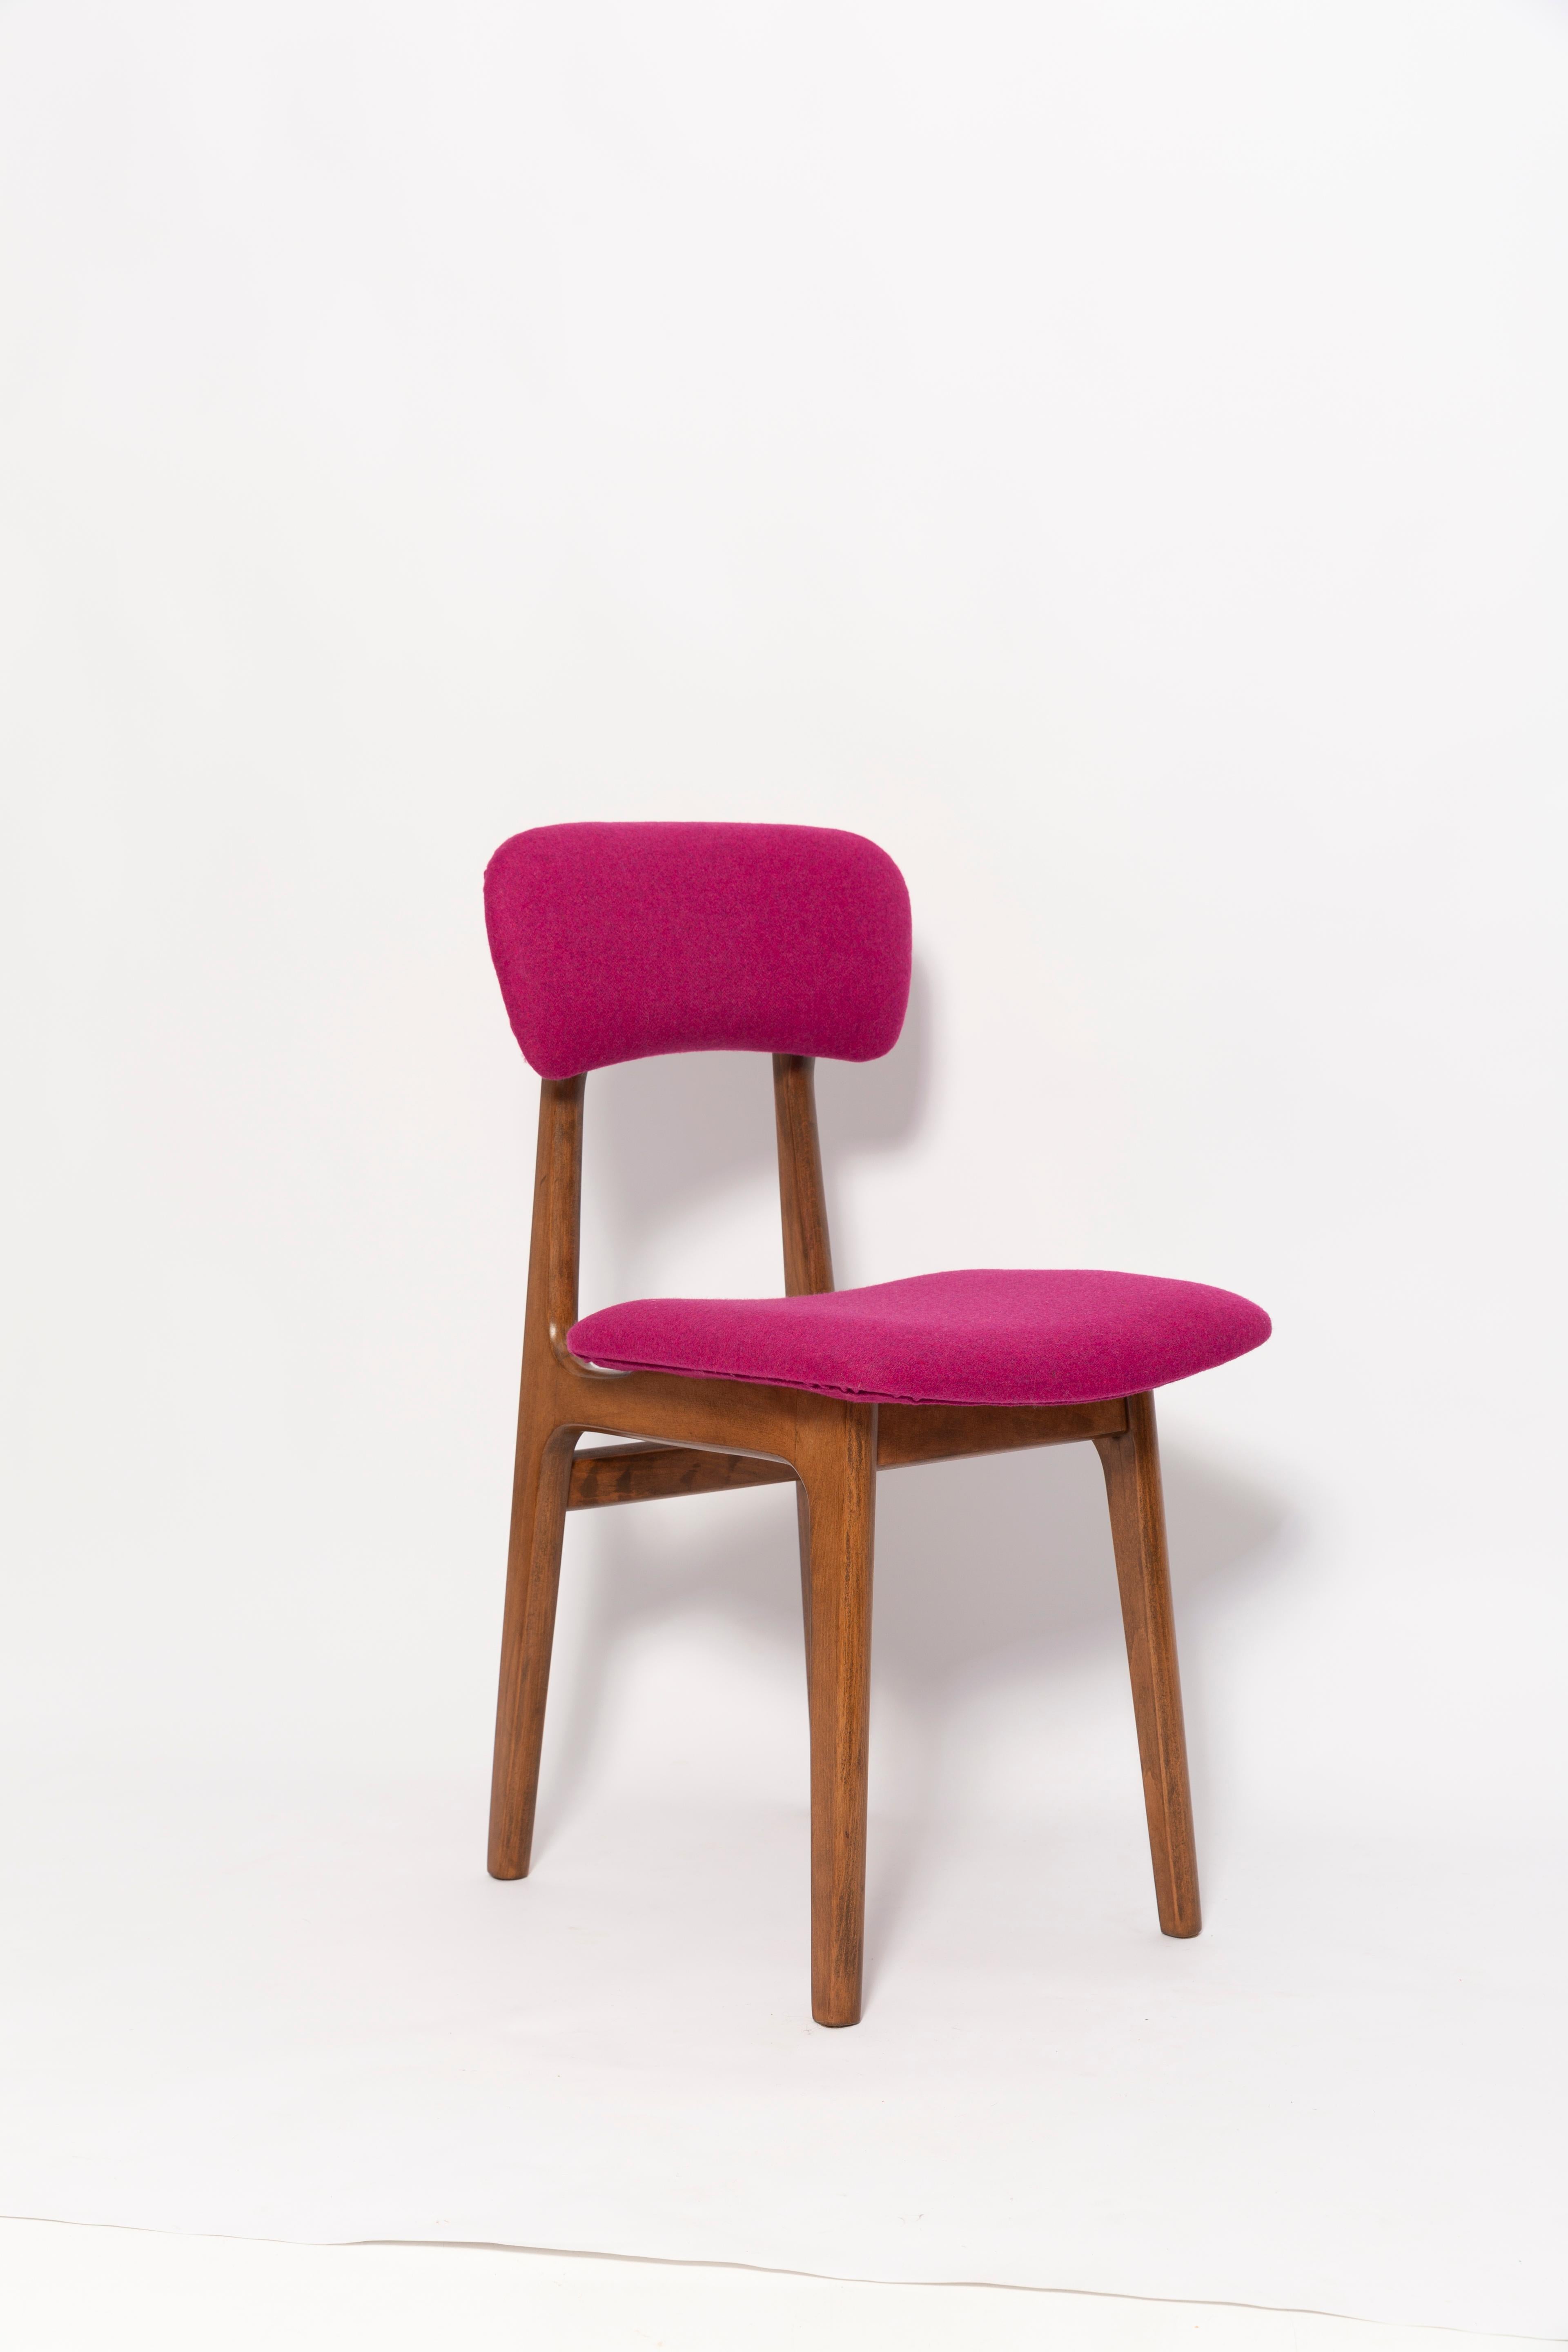 Hand-Crafted Set of Six Mid Century Fuchsia Pink Wool Chairs, Rajmund Halas, Europe, 1960s For Sale